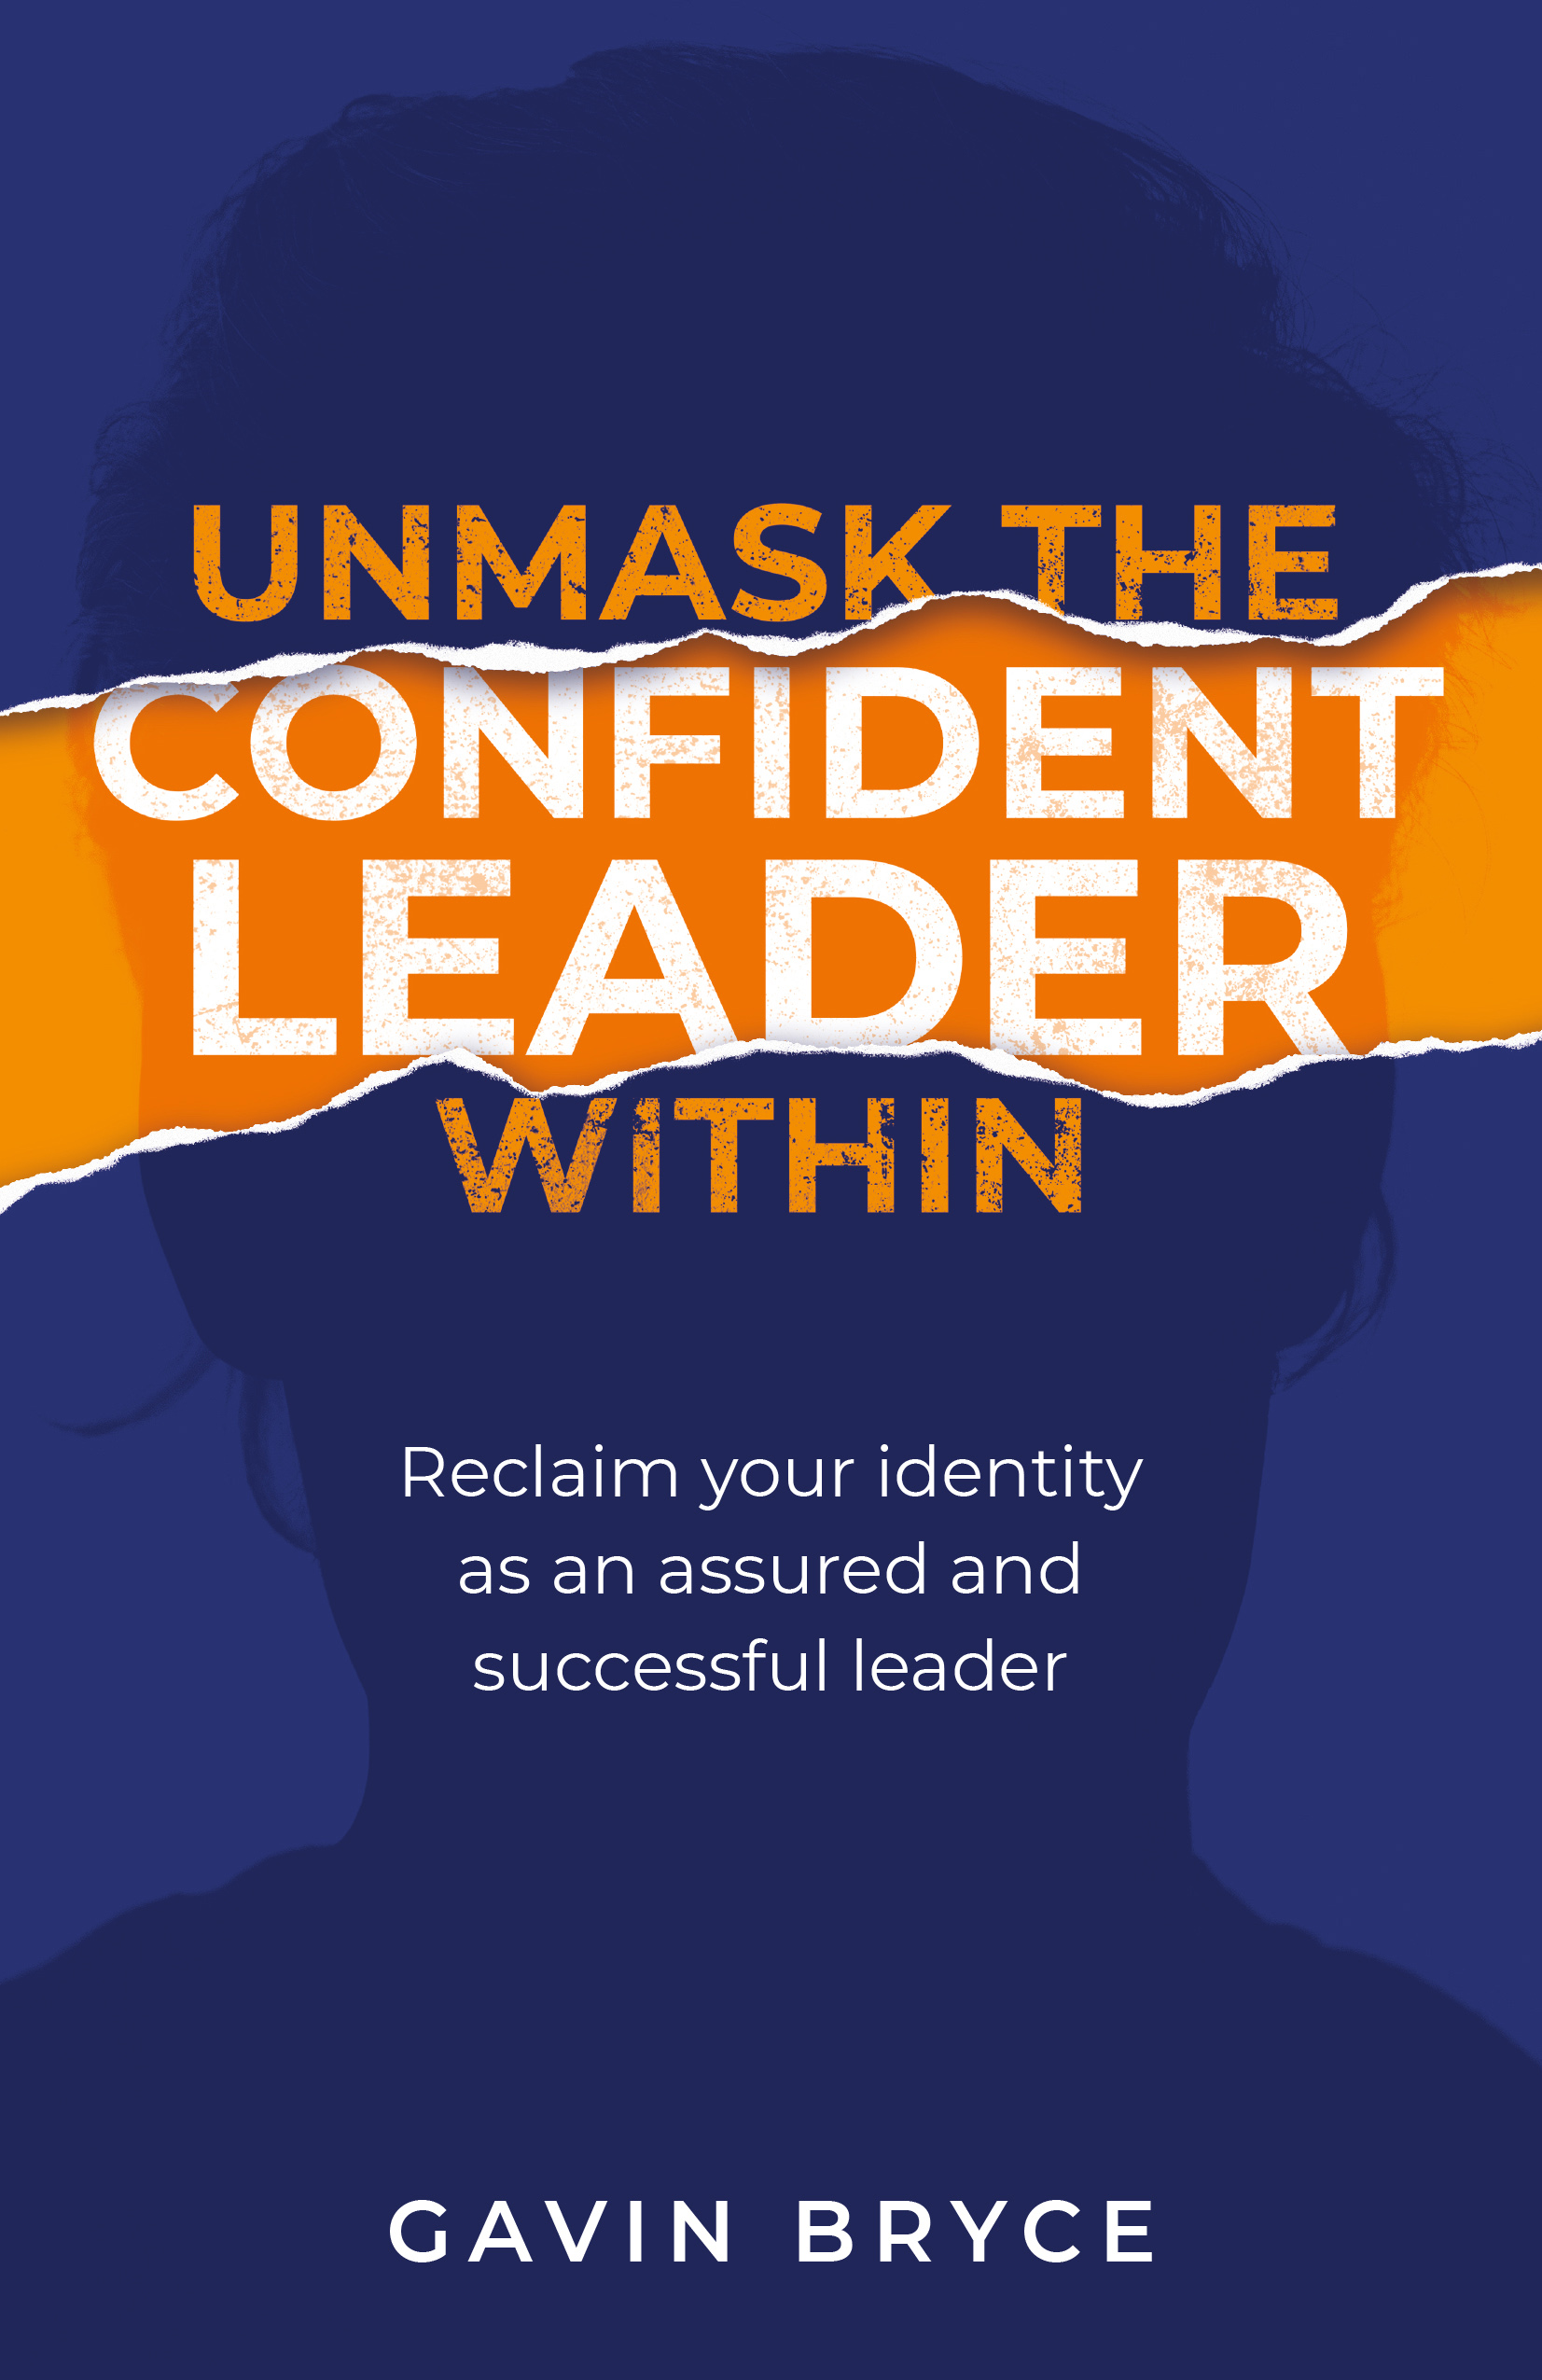 Unmask the Confident Leader Within